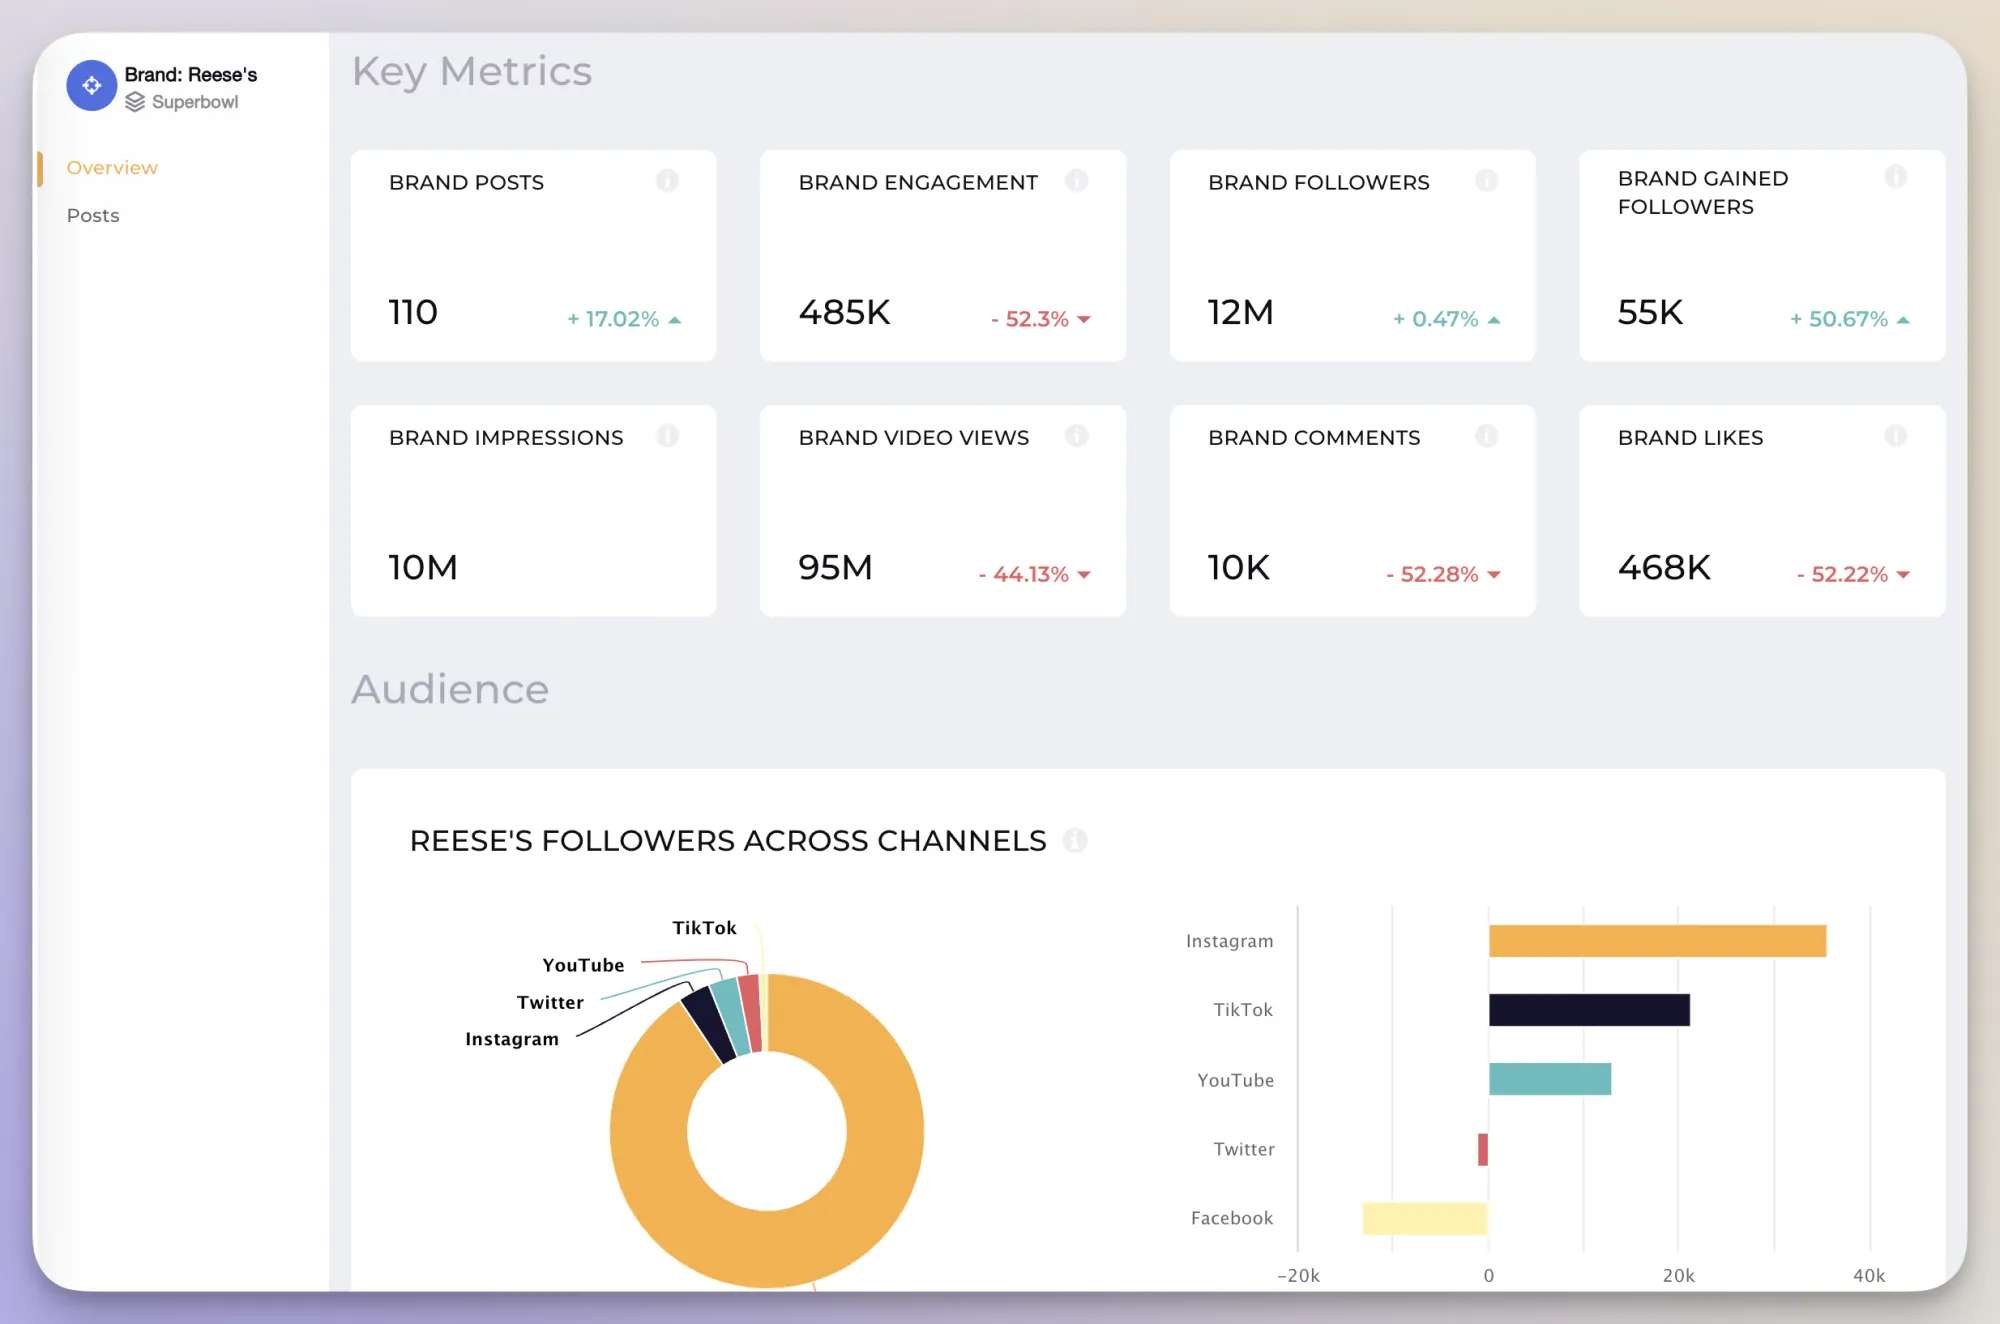 Socialinsider gives you insights into brand awareness metrics at a glance